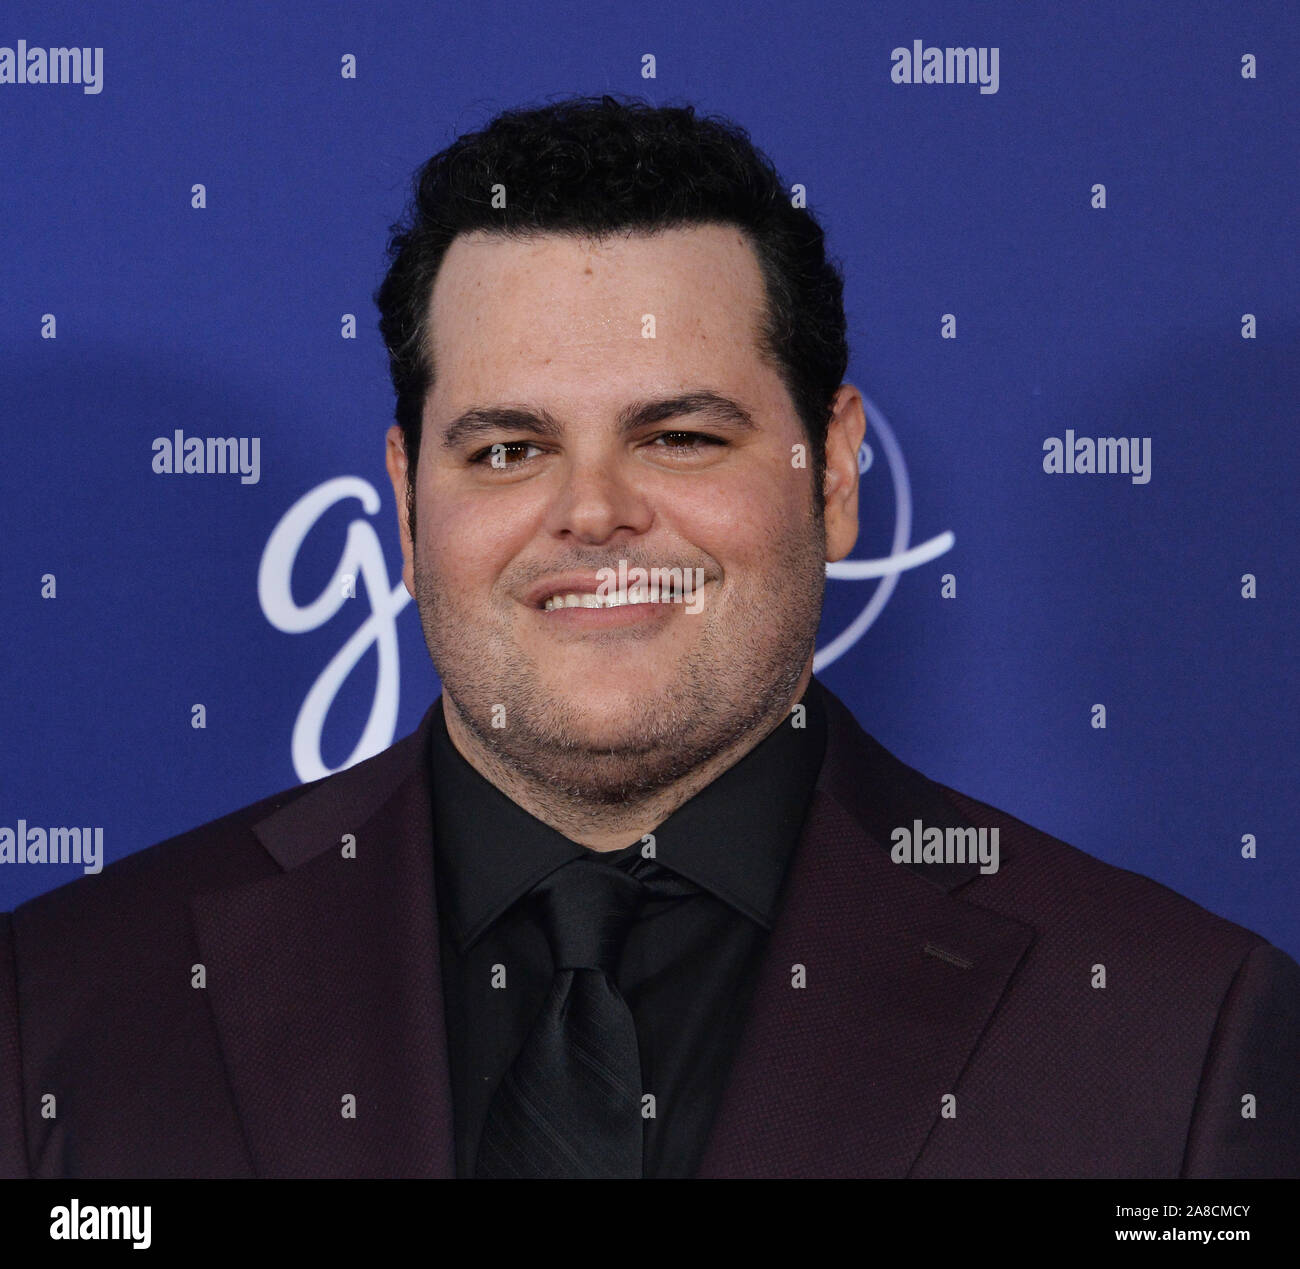 Los Angeles, United States. 08th Nov, 2019. Cast member Josh Gad attends the premiere of the animated musical comedy 'Frozen II' premiere at the Dolby Theatre in the Hollywood section of Los Angeles on Thursday, November 7, 2019. Storyline: Anna, Elsa, Kristoff, Olaf and Sven leave Arendelle to travel to an ancient, autumn-bound forest of an enchanted land. They set out to find the origin of Elsa's powers in order to save their kingdom. Photo by Jim Ruymen/UPI Credit: UPI/Alamy Live News Stock Photo